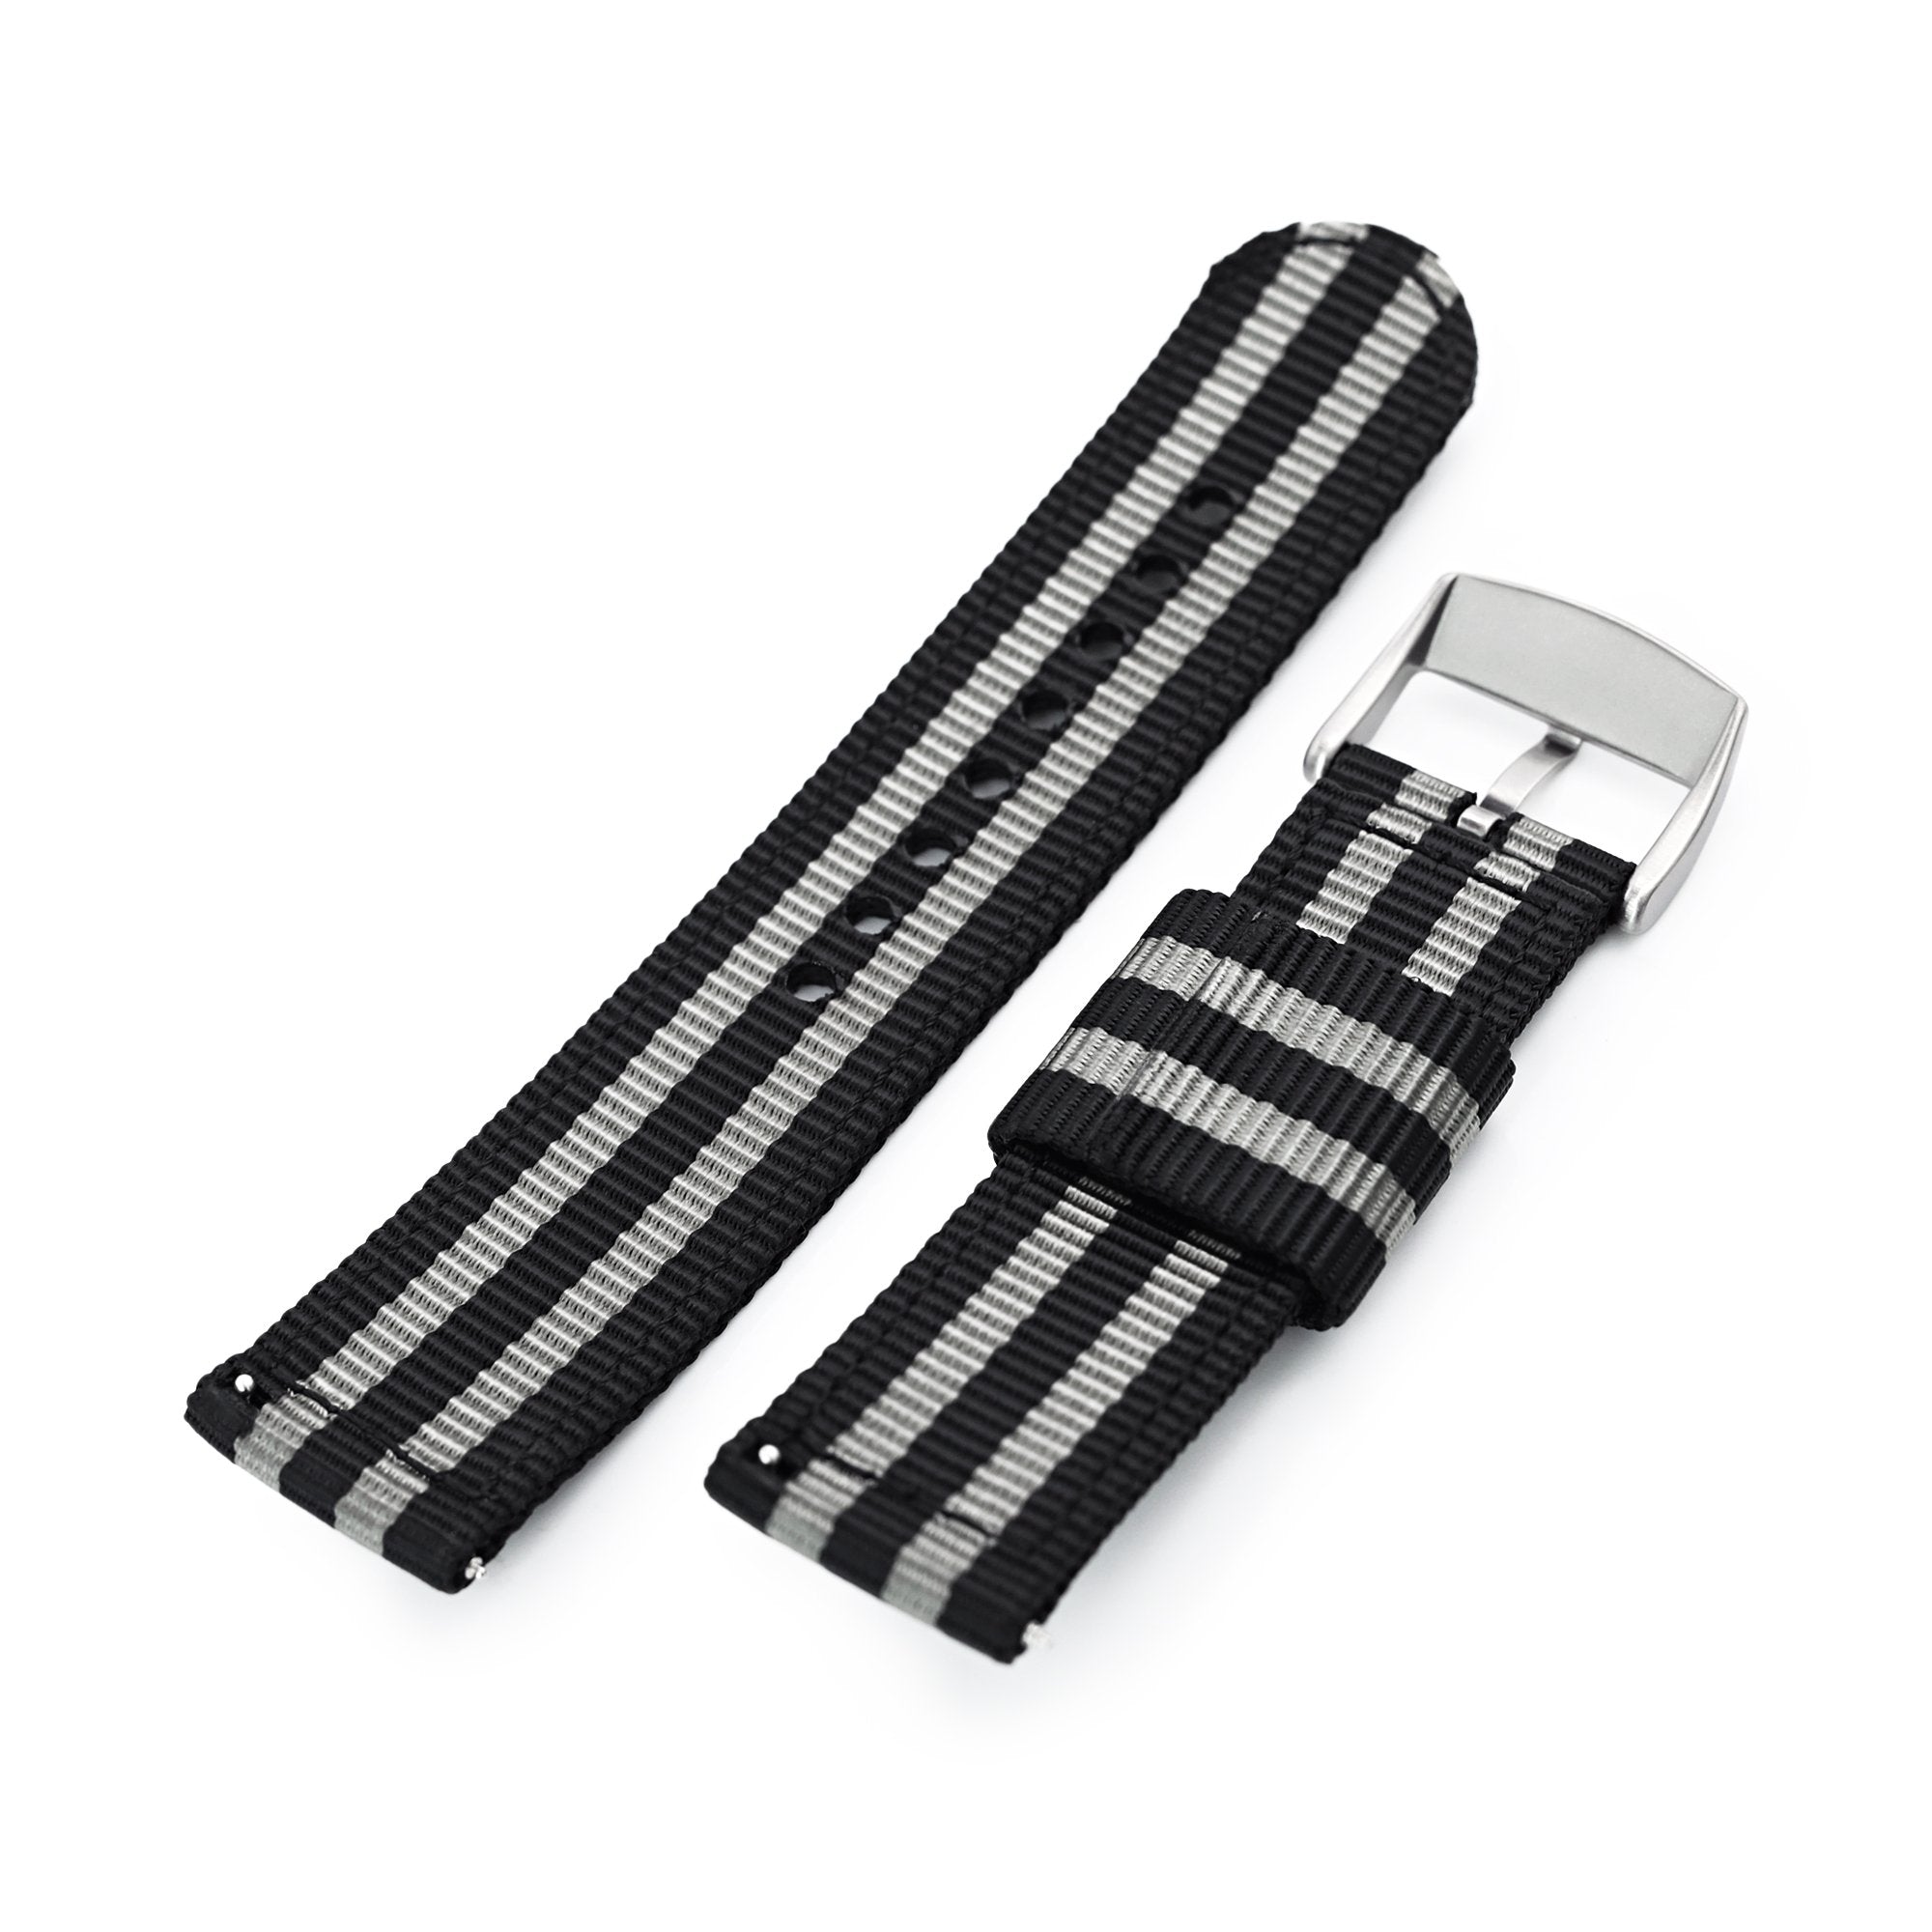 22mm 2-pcs Nylon Watch Band, Quick Release, Black & Grey Stripes, Brushed Buckle Strapcode Watch Bands